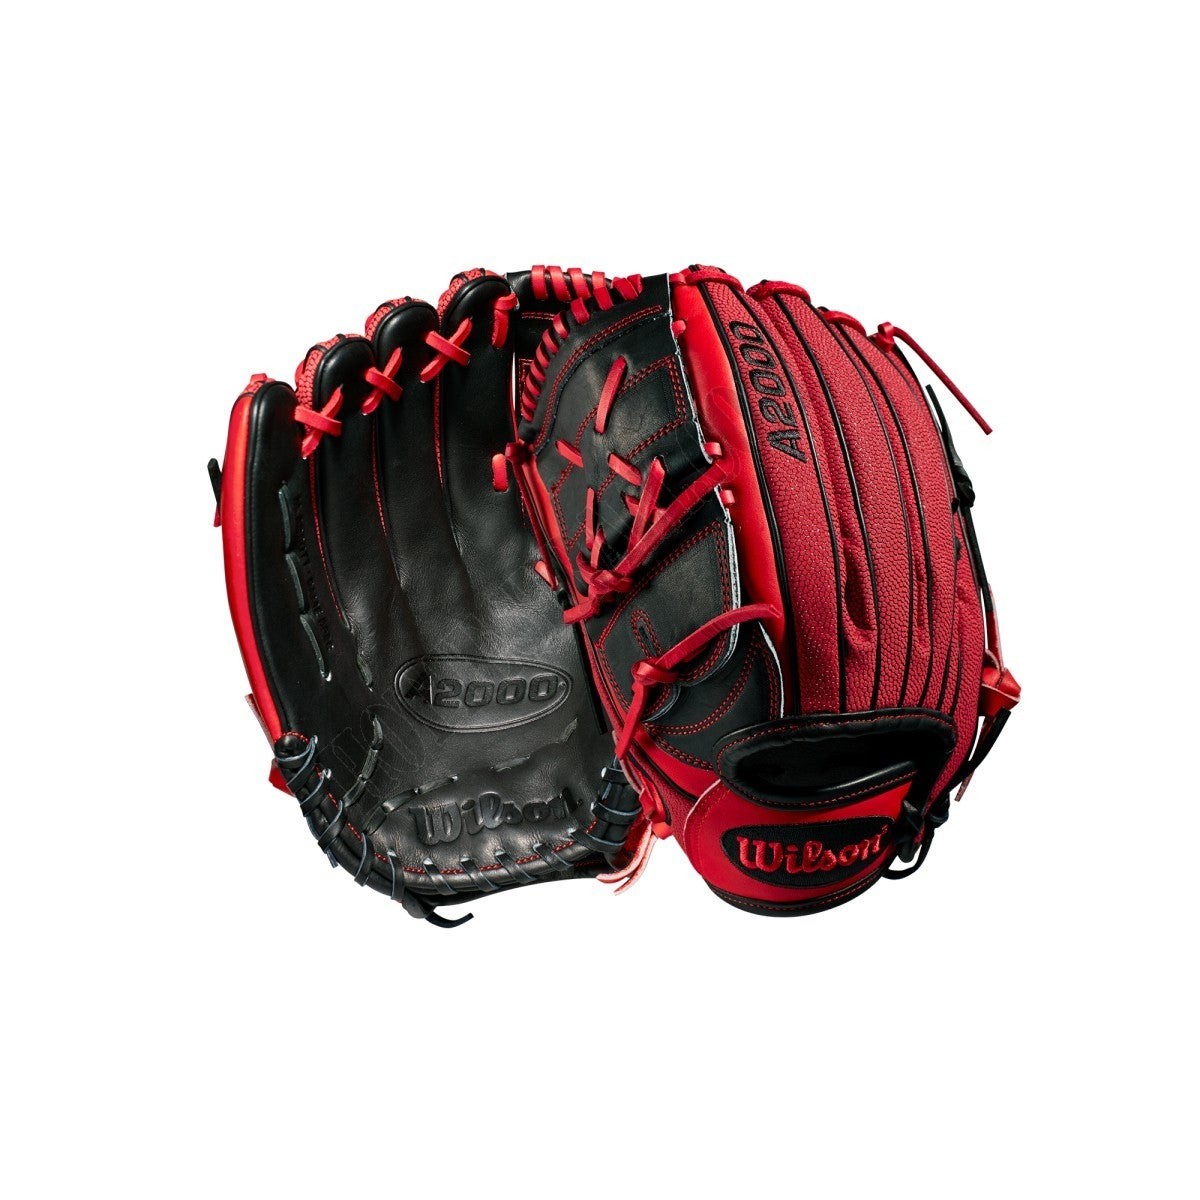 2018 A2000 MA14 SuperSkin GM 12.25" Pitcher's Fastpitch Glove - Left Hand Throw ● Wilson Promotions - 2018 A2000 MA14 SuperSkin GM 12.25" Pitcher's Fastpitch Glove - Left Hand Throw ● Wilson Promotions